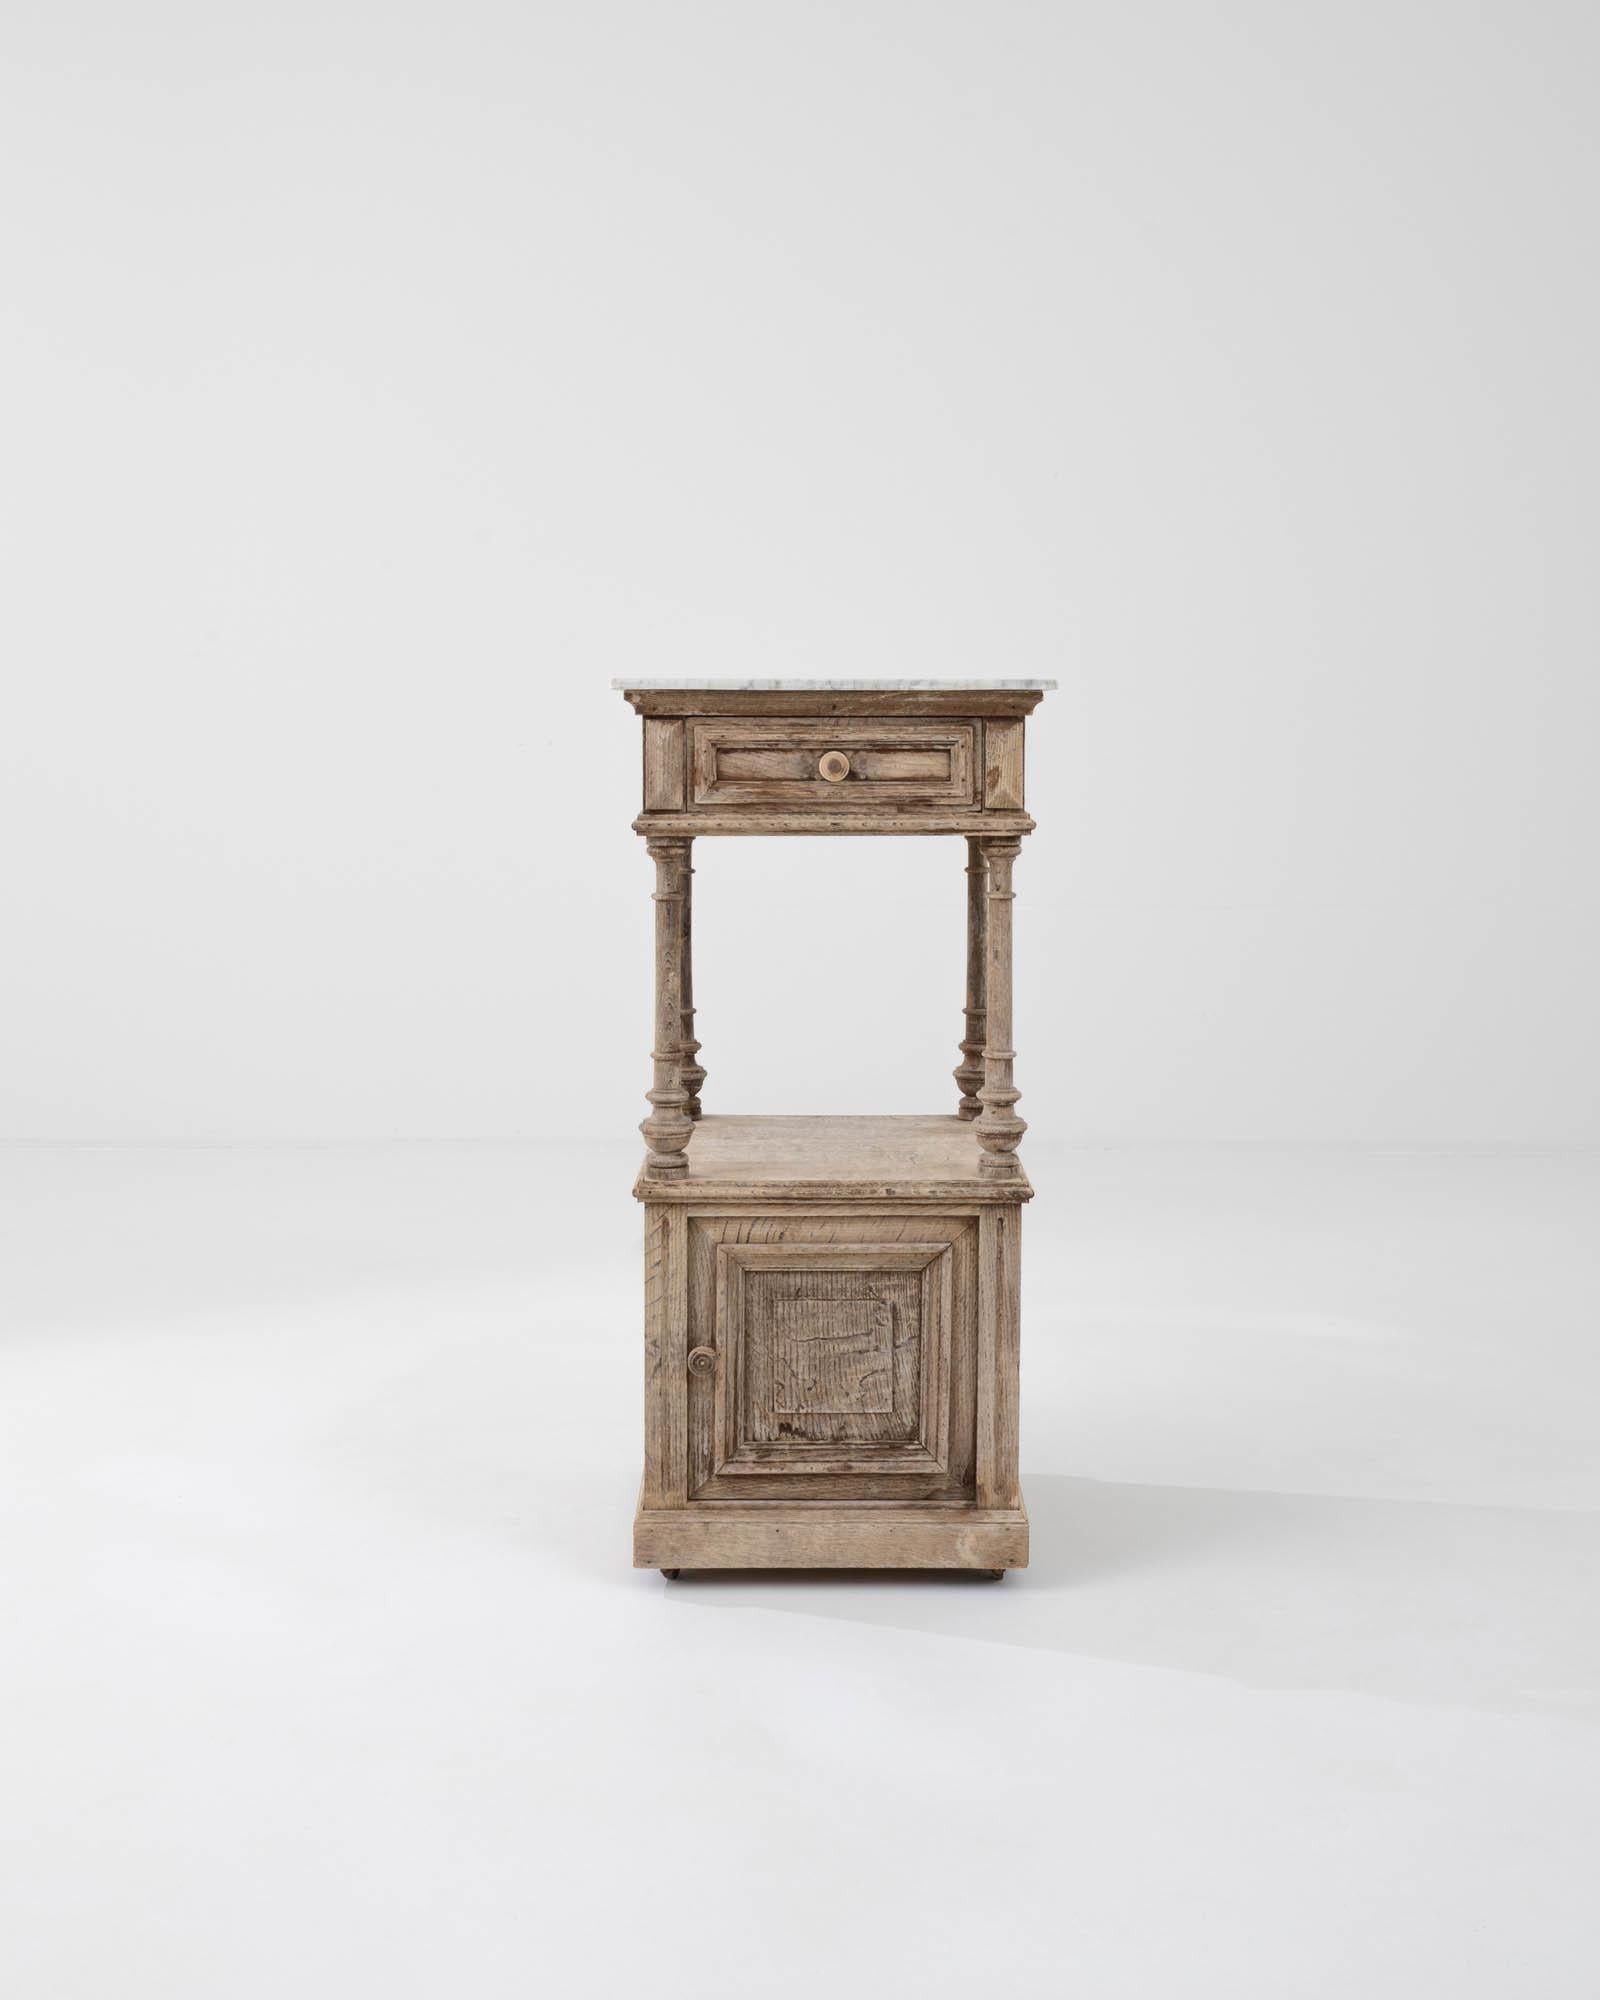 An oak night stand on wheels created in France circa 1900. Traditionally crafted, this subtly styled bedside table is adorned with a marble top, projecting a sense of calm and refined elegance. Cloudy gray veins drift through the ivory colored